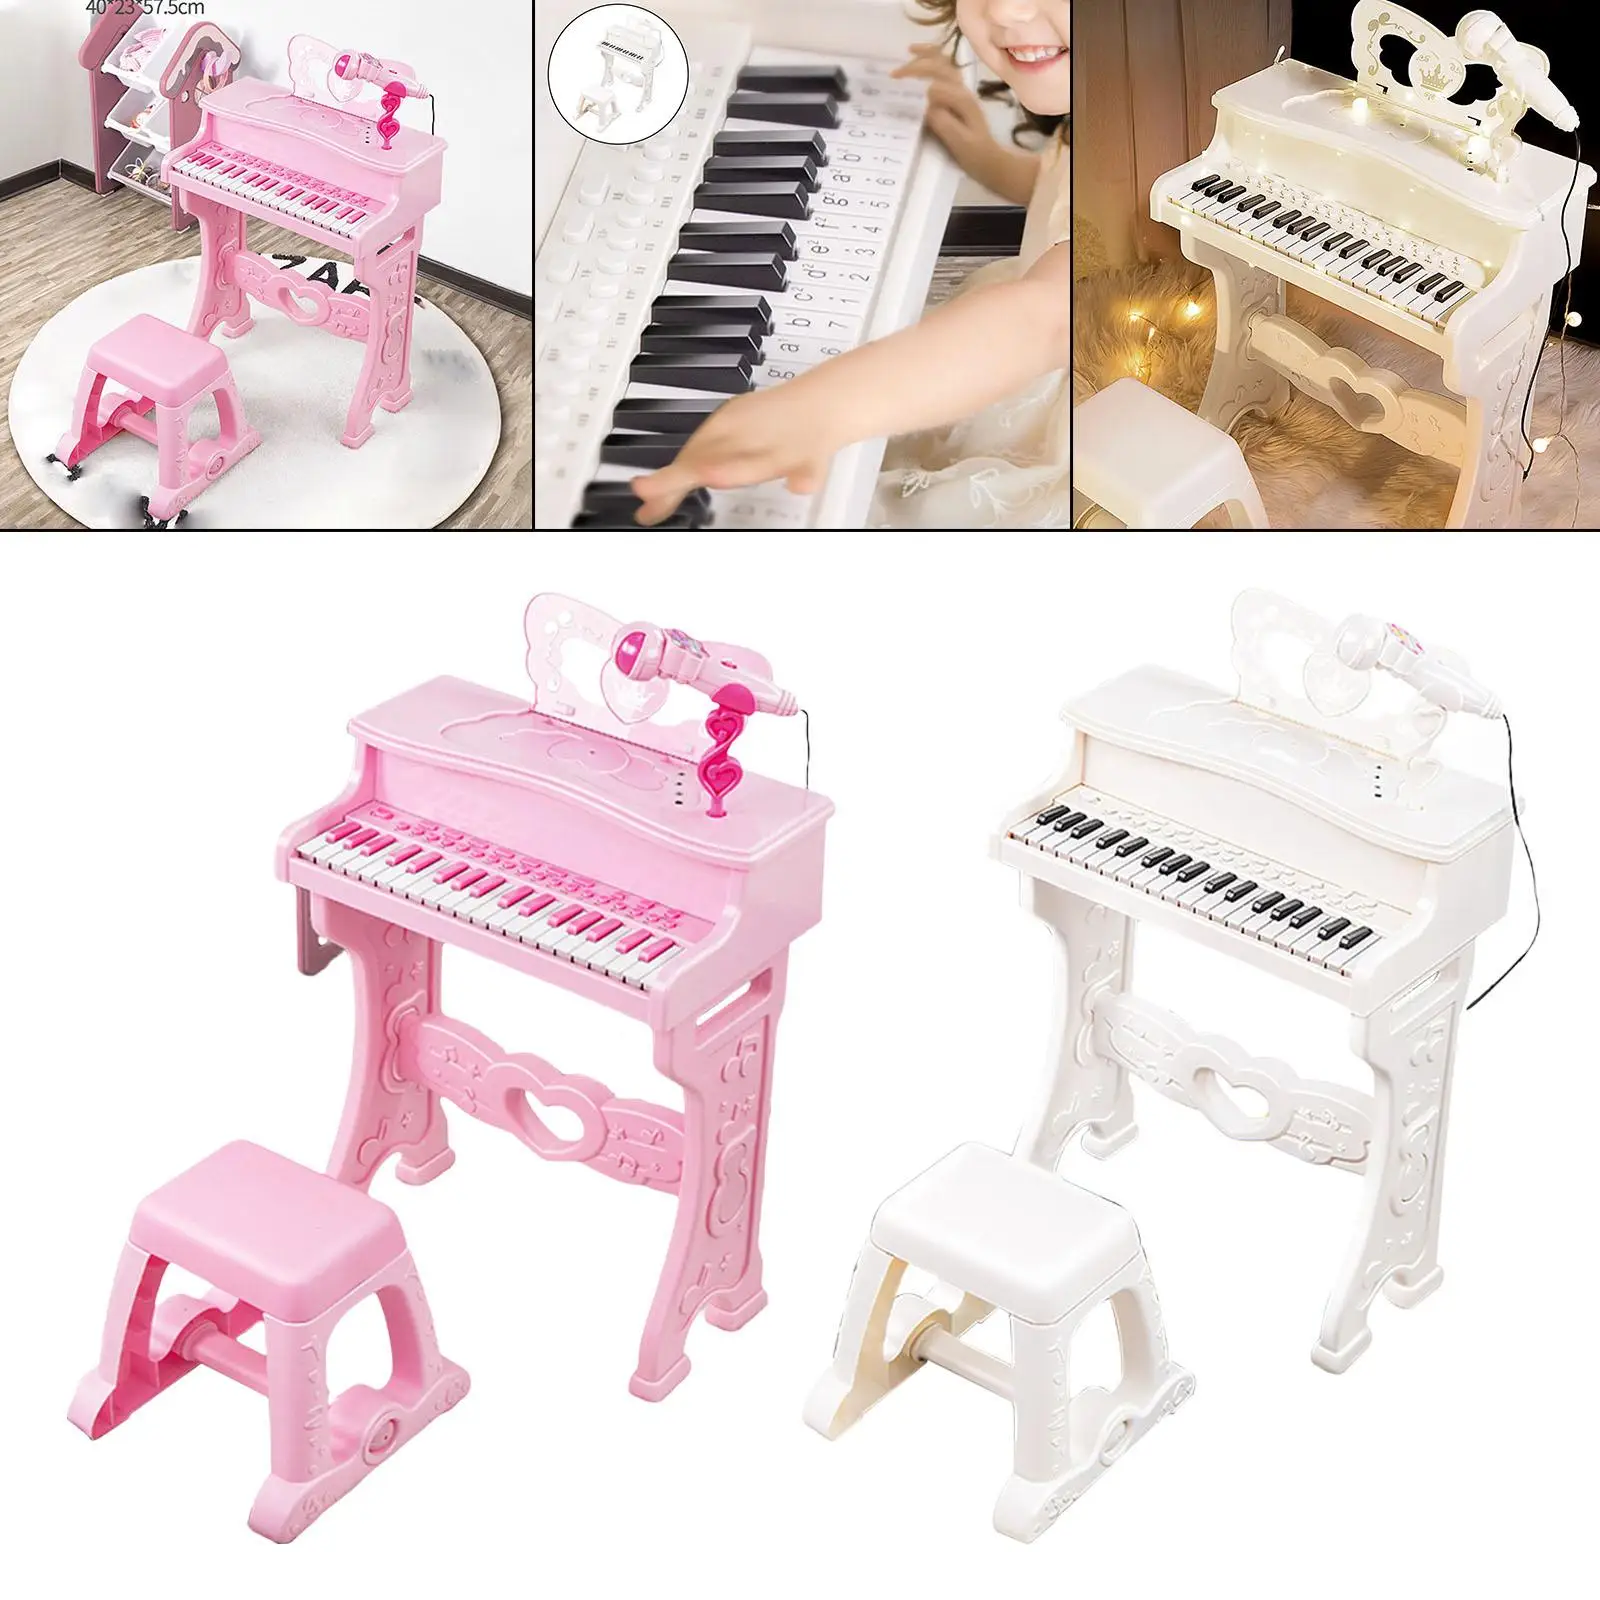 37 Key Electronic Piano Educational Toy Keyboard for Baby Children Birthday Gift